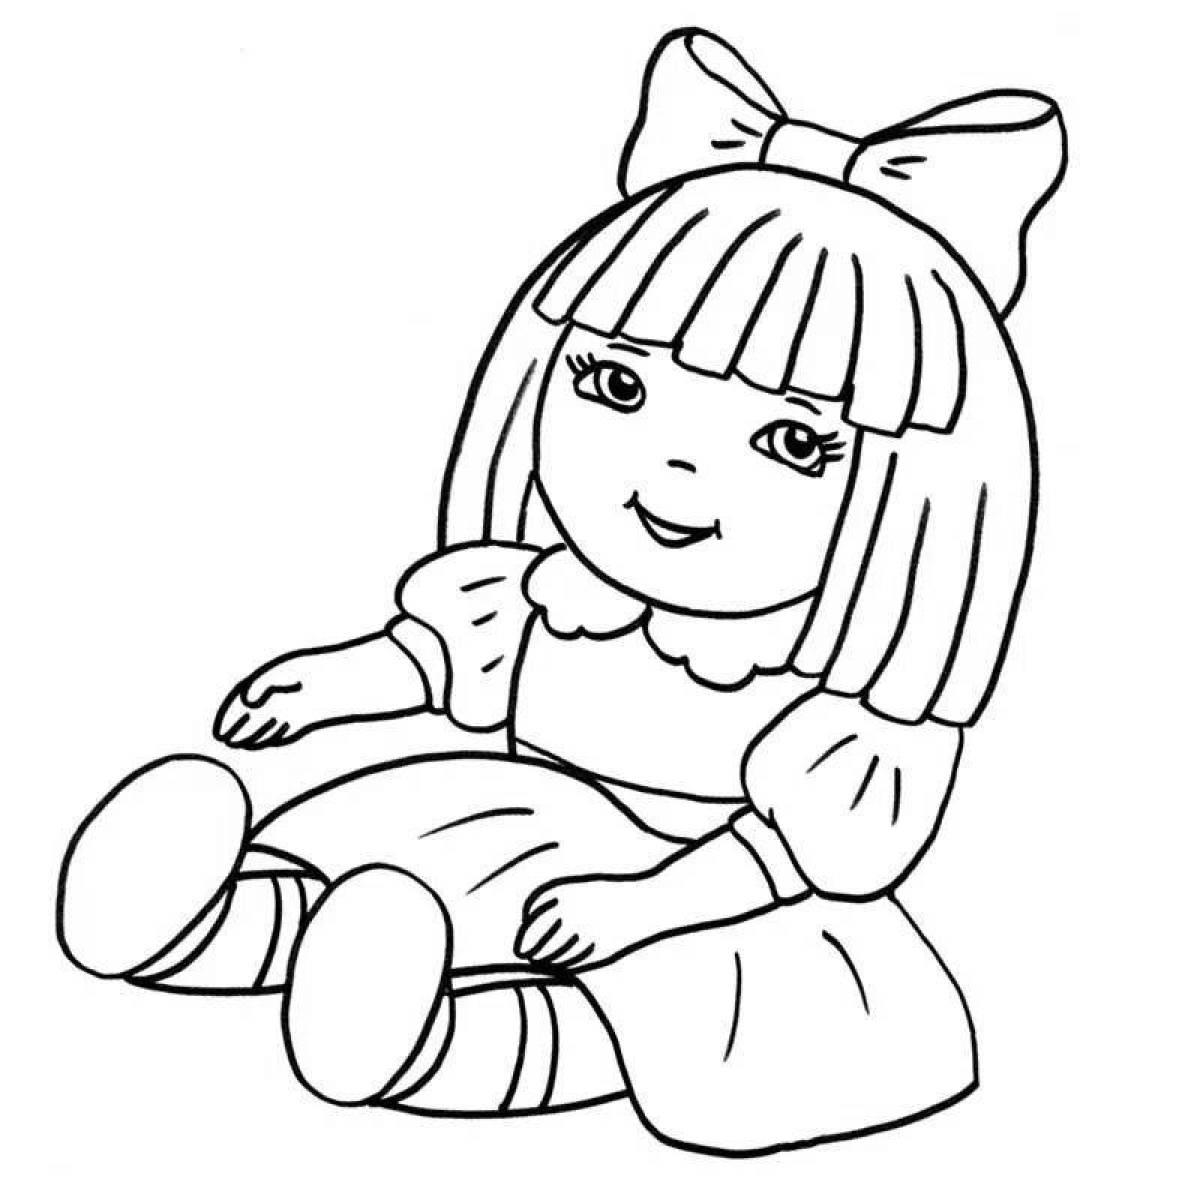 Colorful doll coloring for kids